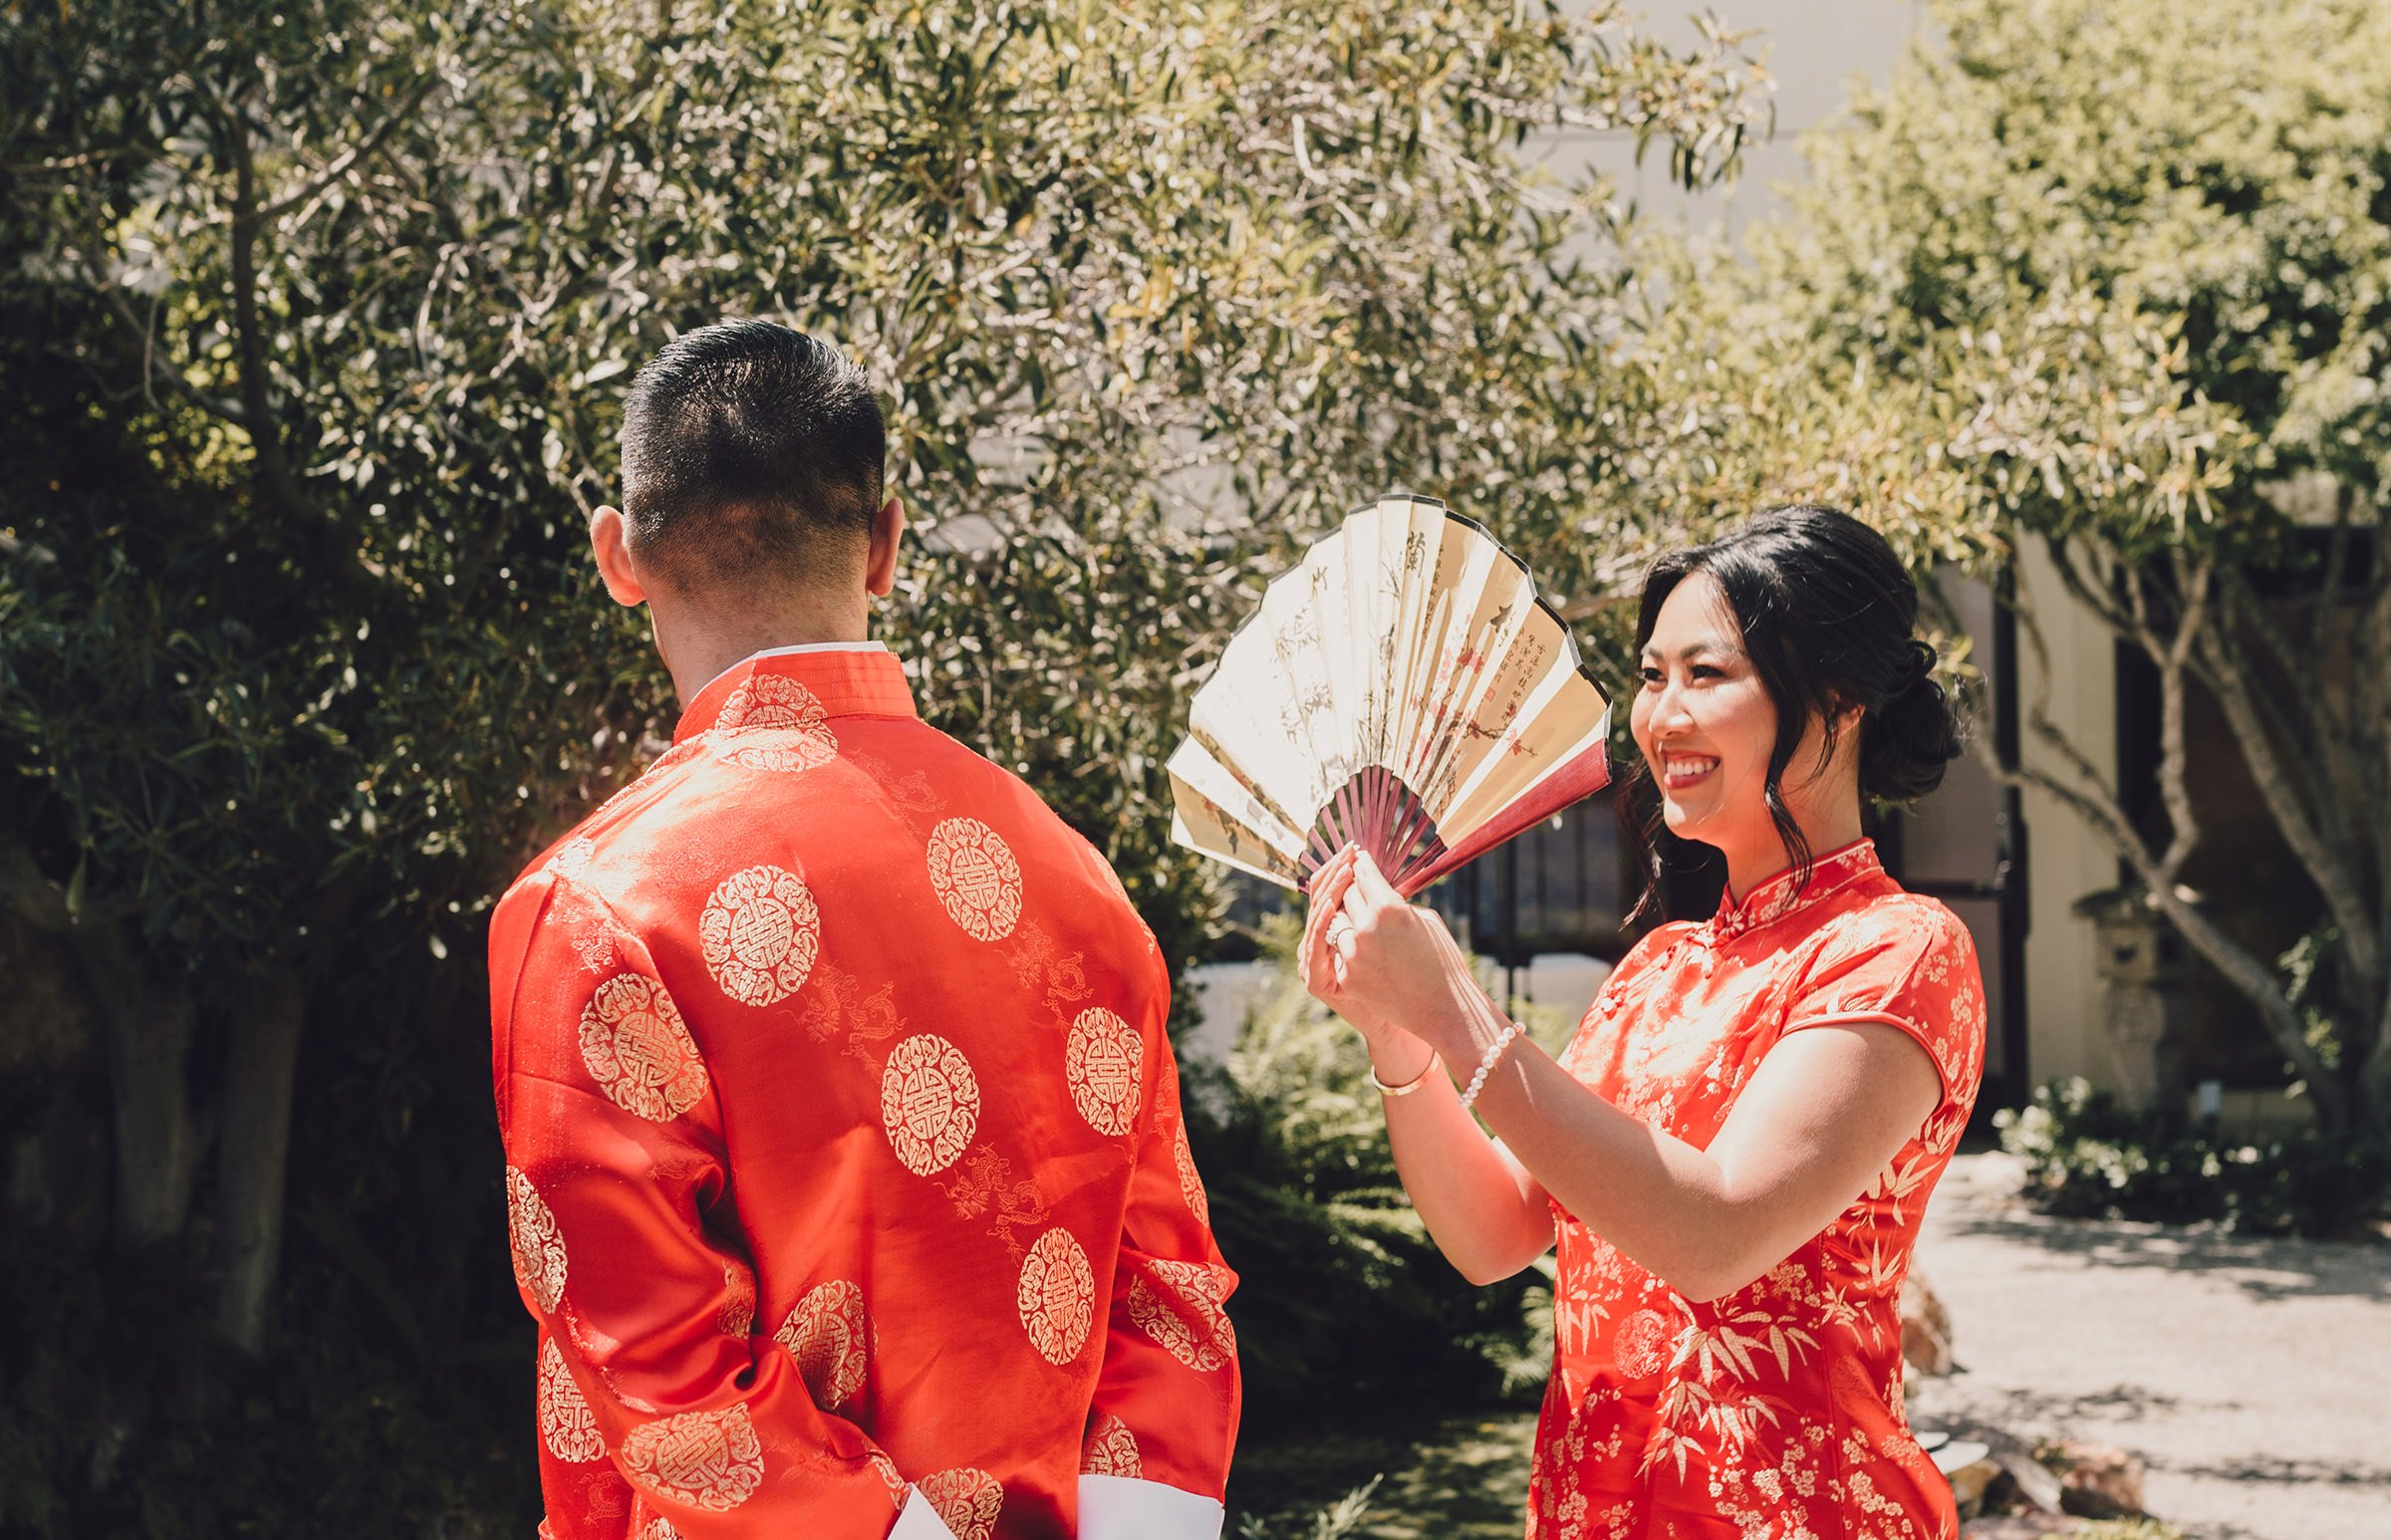 modern-asian-american-wedding-first-look-traditional-chinese-attire-socal-photographer-5.jpg